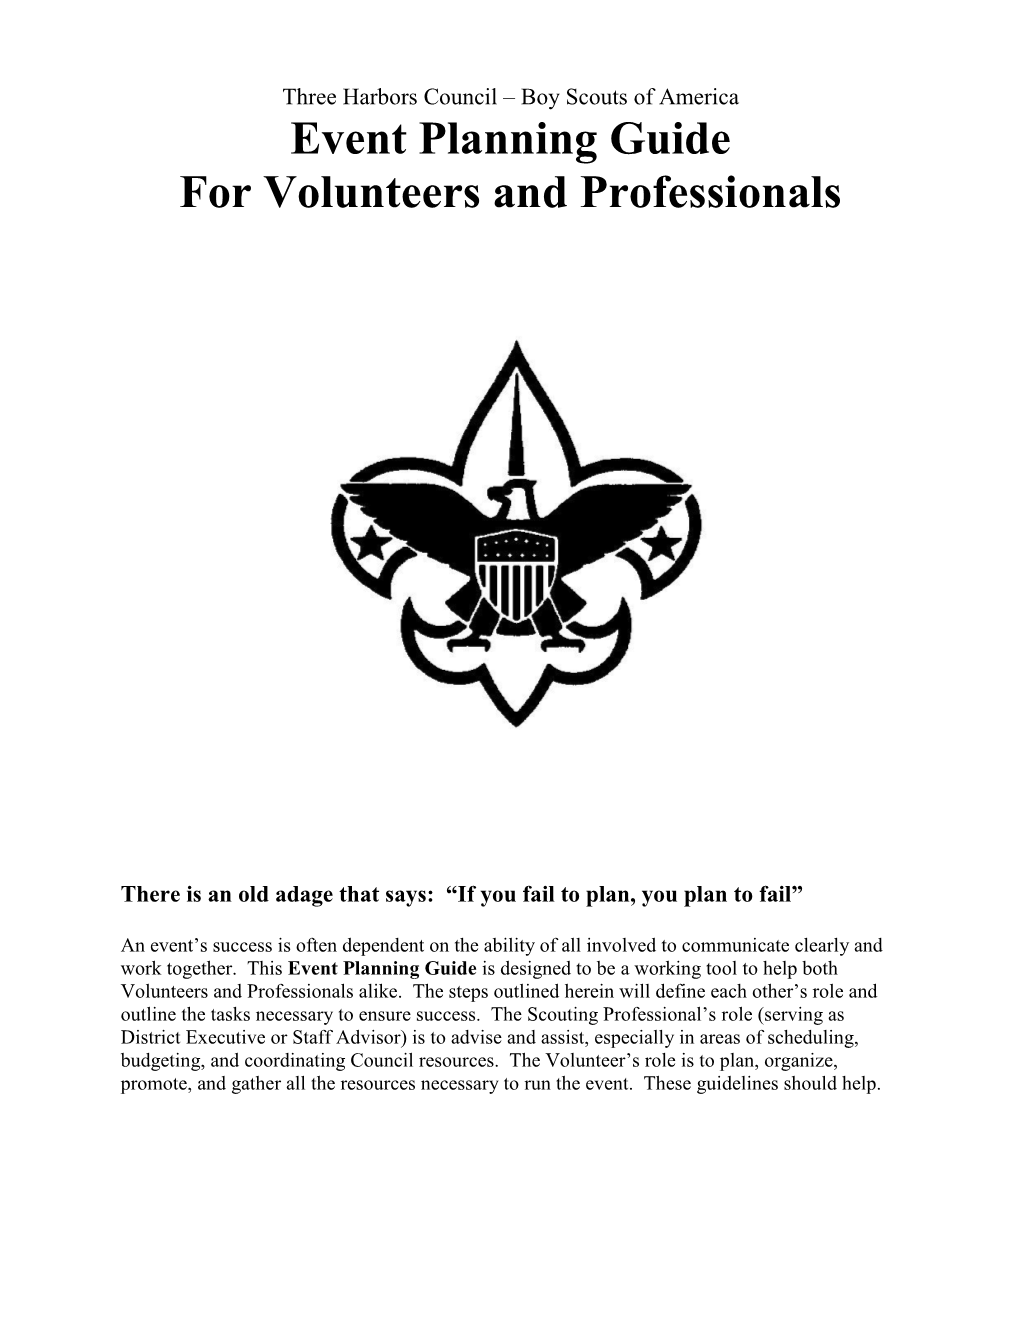 Event Planning Guide for Volunteers and Professionals